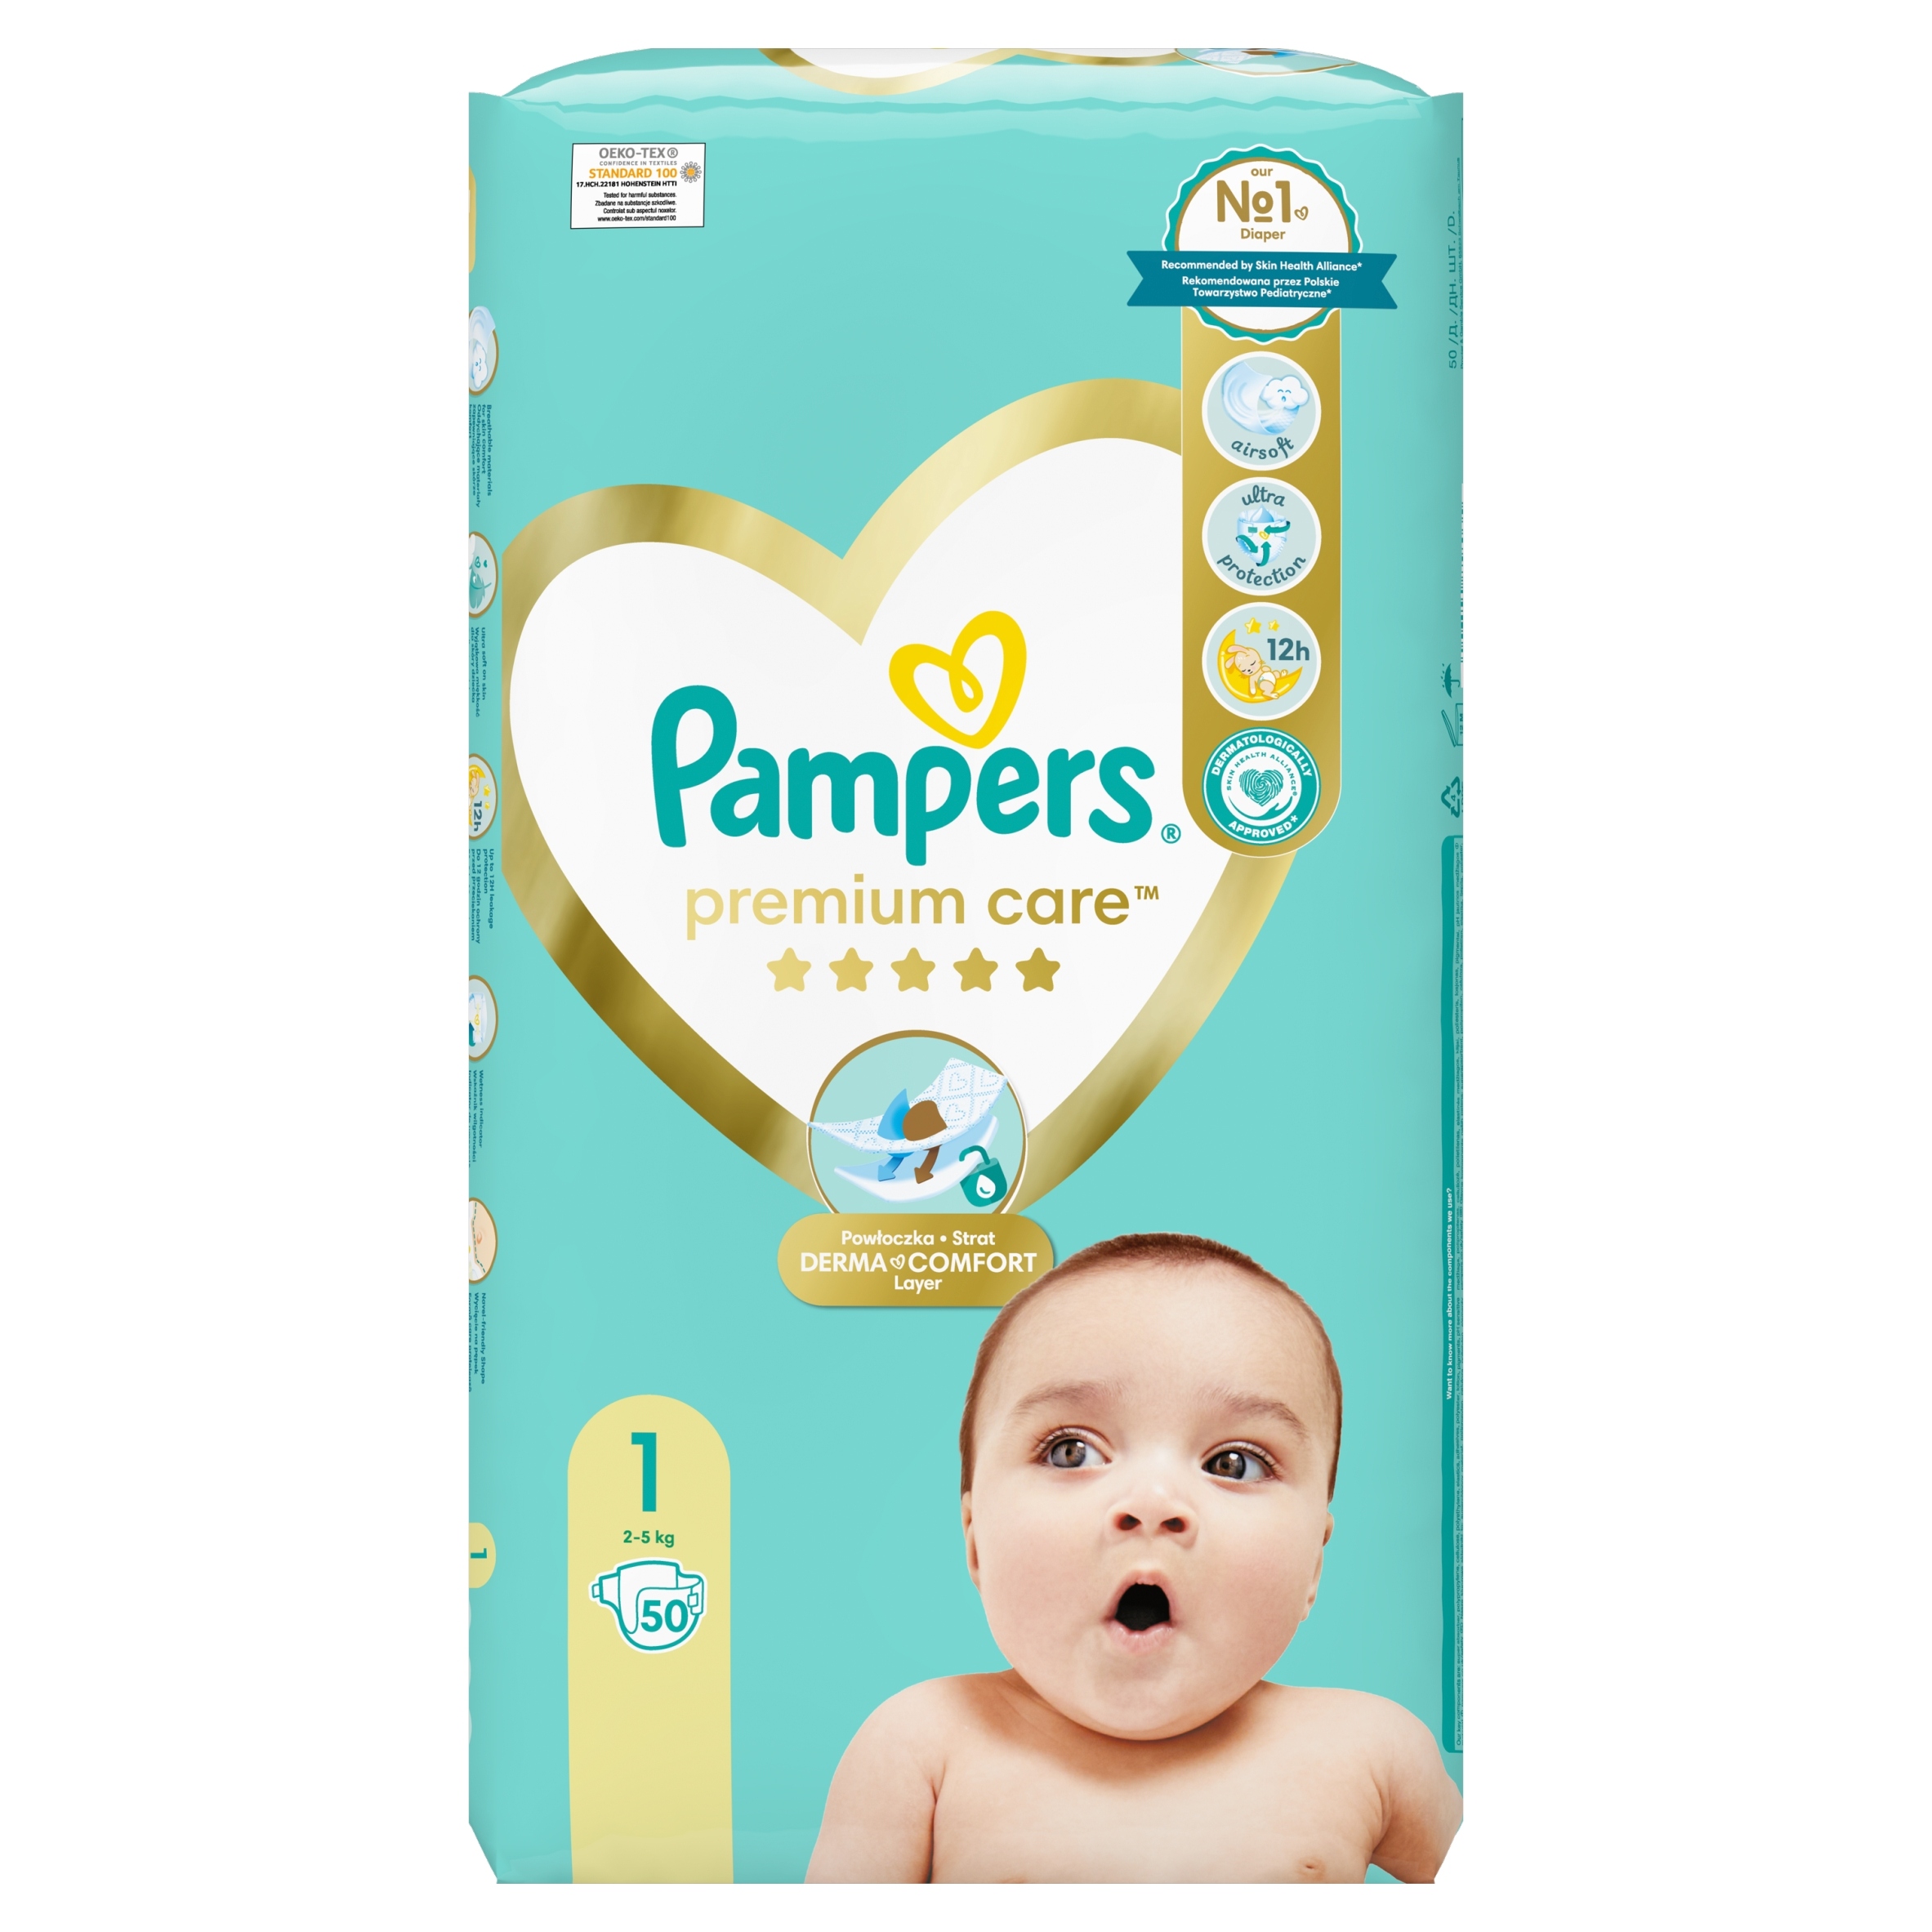 pampers active fit size 3 monthly pack